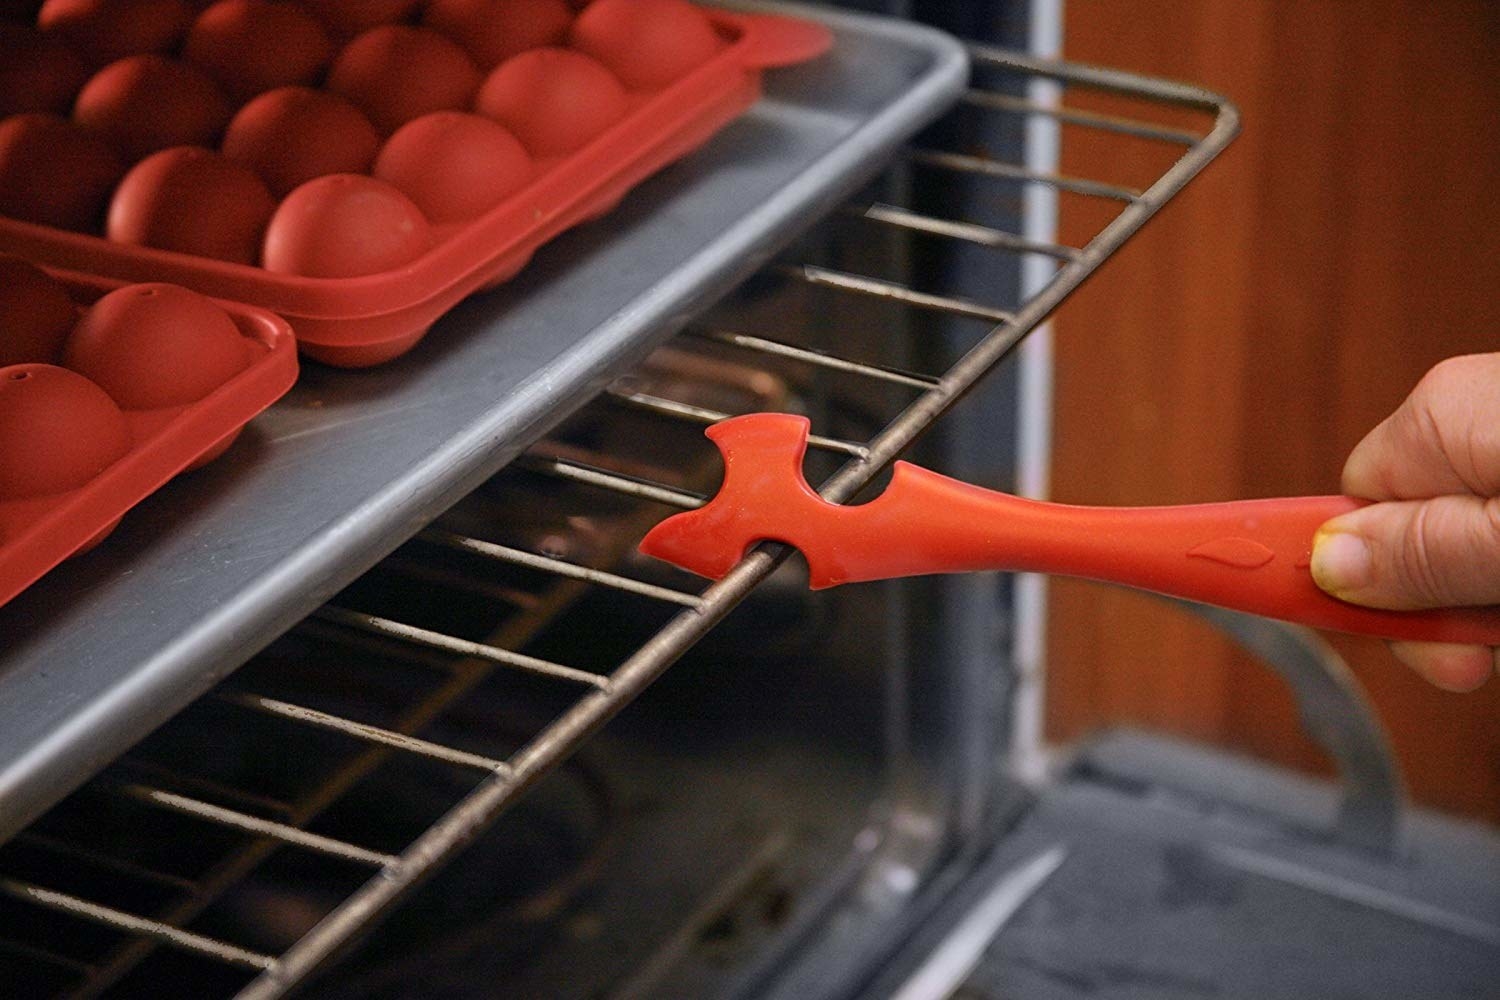 A person using a small long silicone hook to pull an oven rack out of the oven